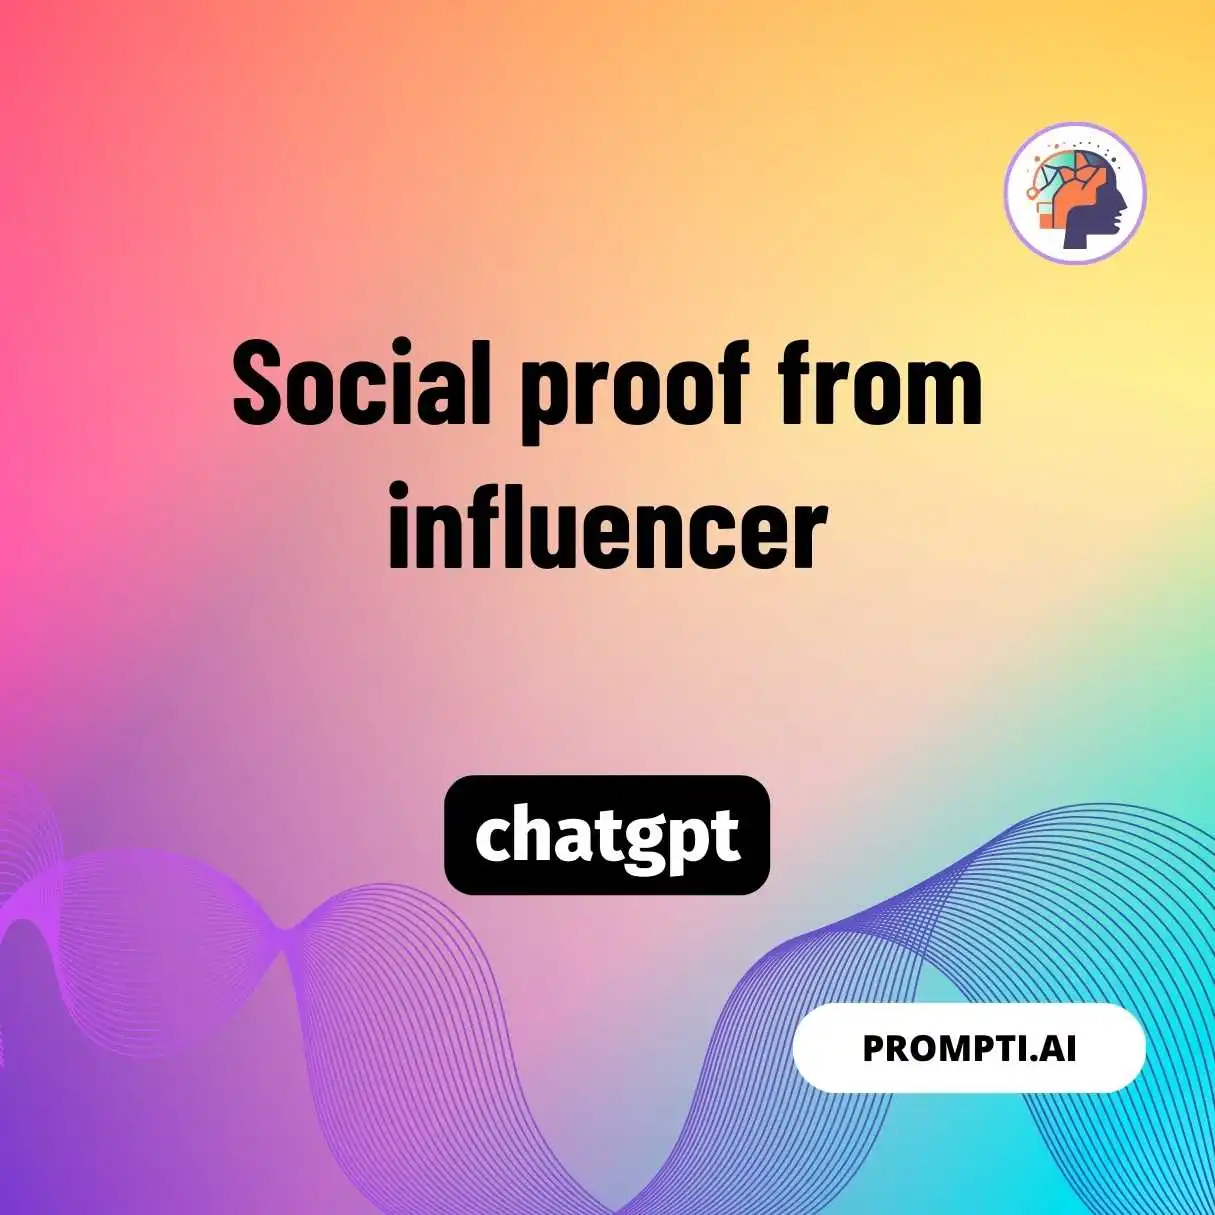 Social proof from influencer